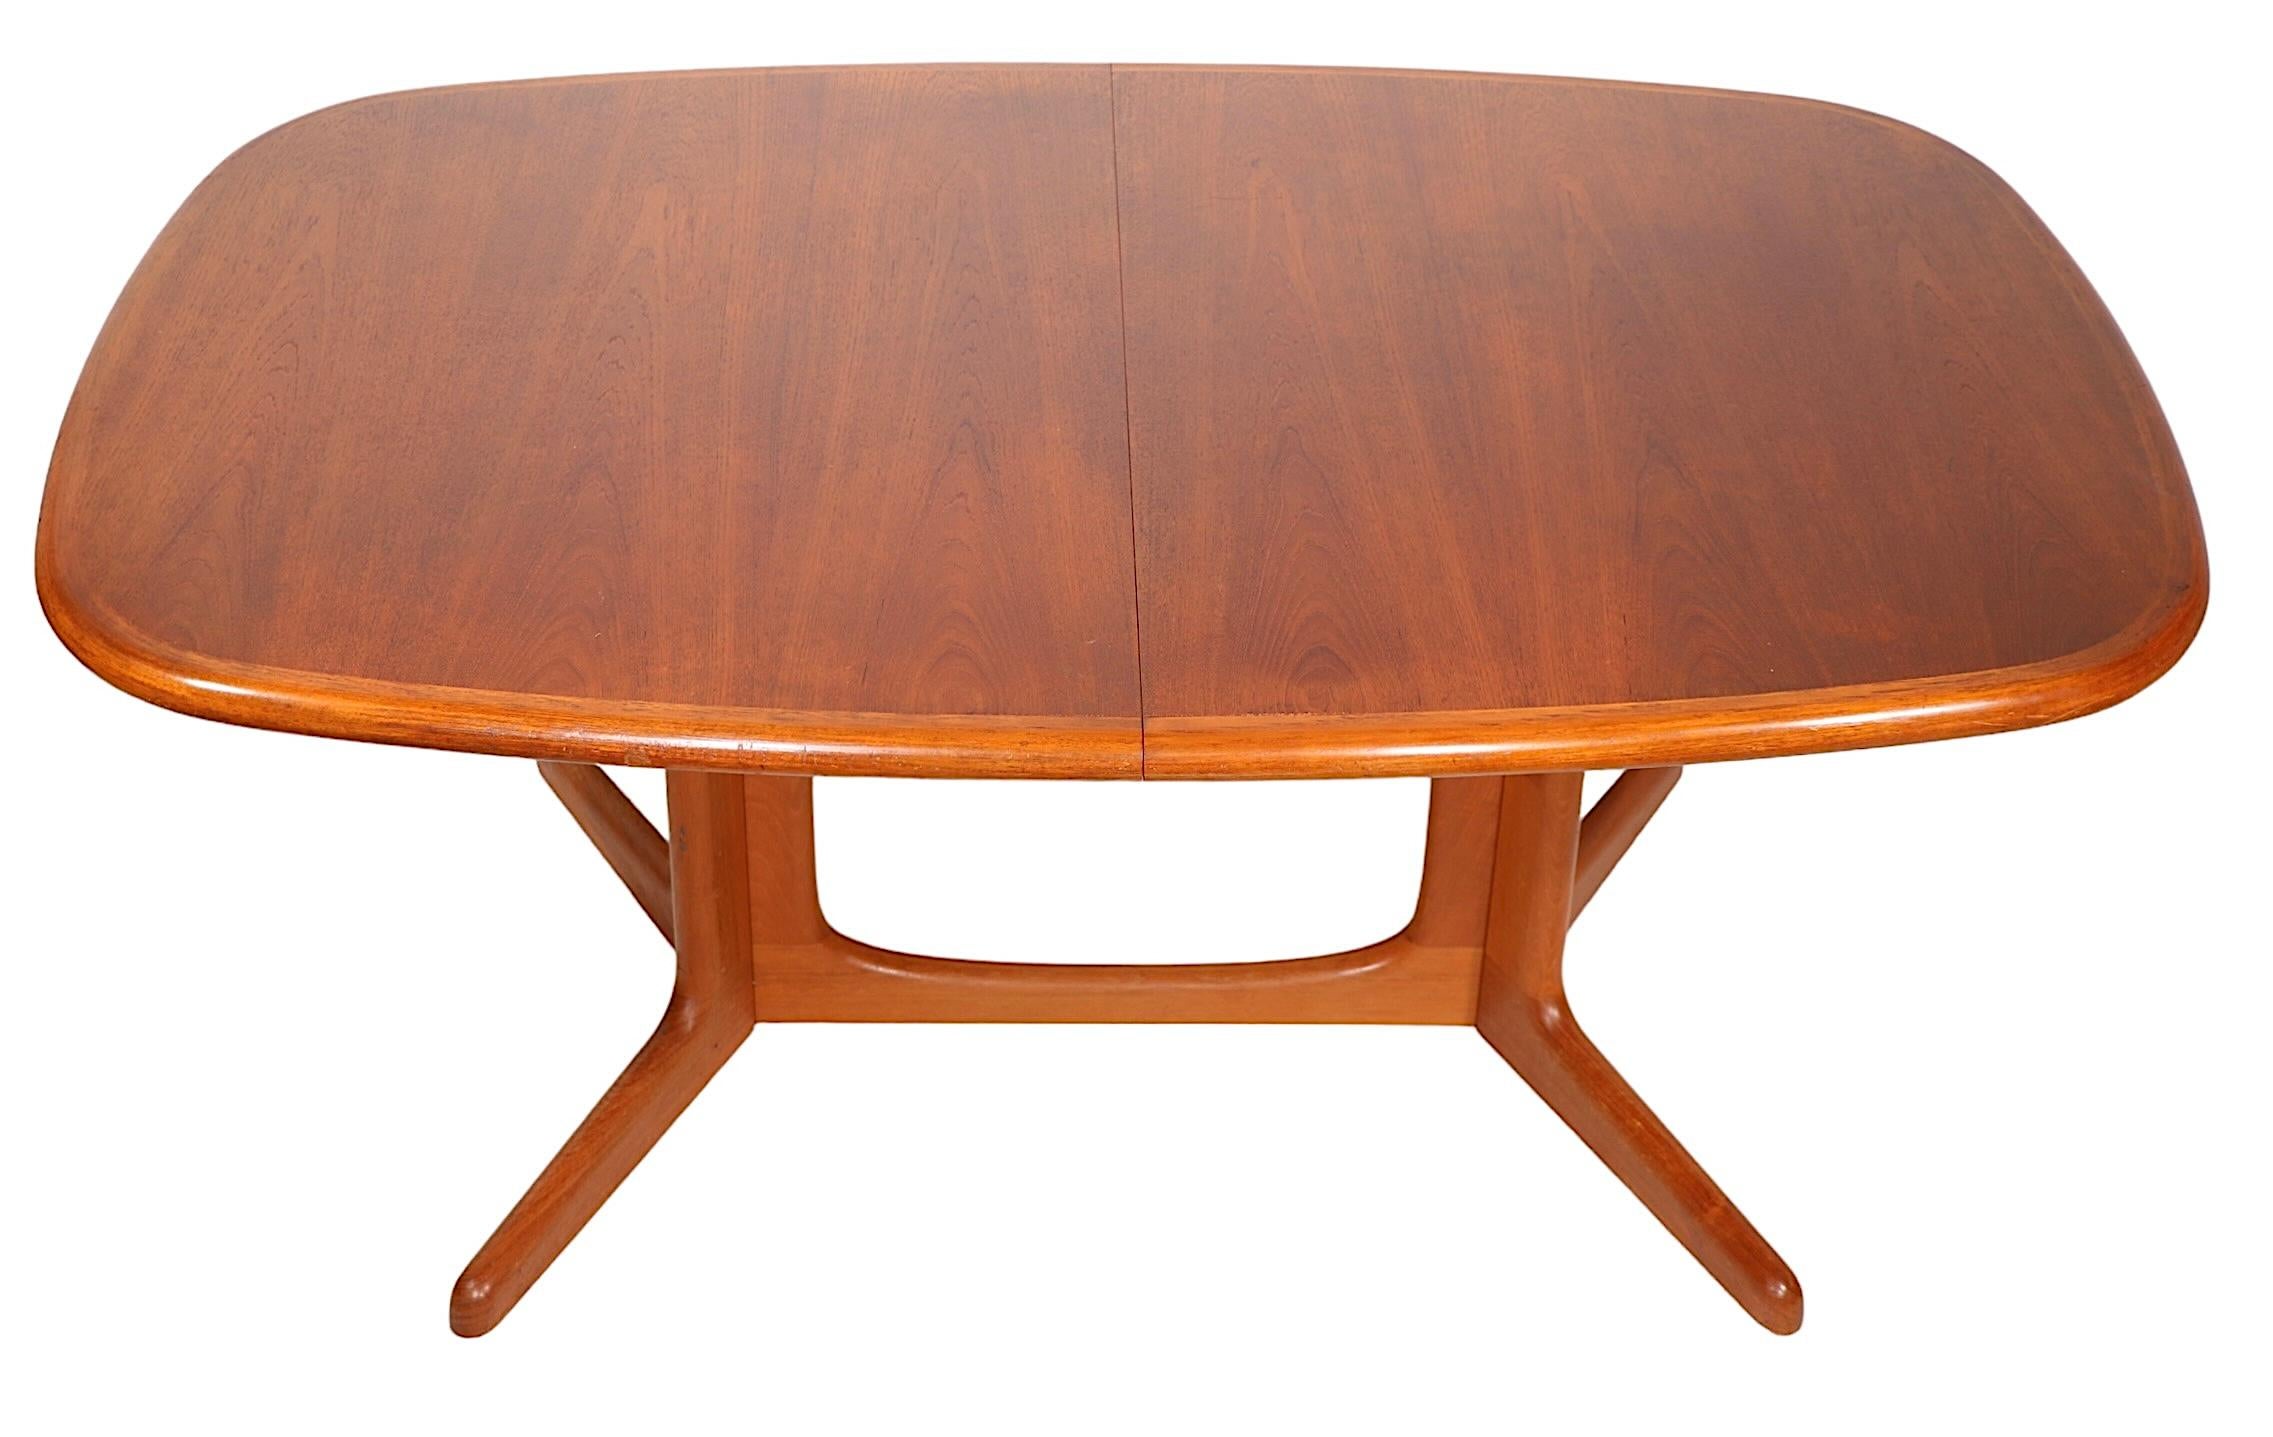 Late 20th Century Danish Mid Century Oval Teak Dining Table by Niels Otto Moller for Gudme c 1970s For Sale